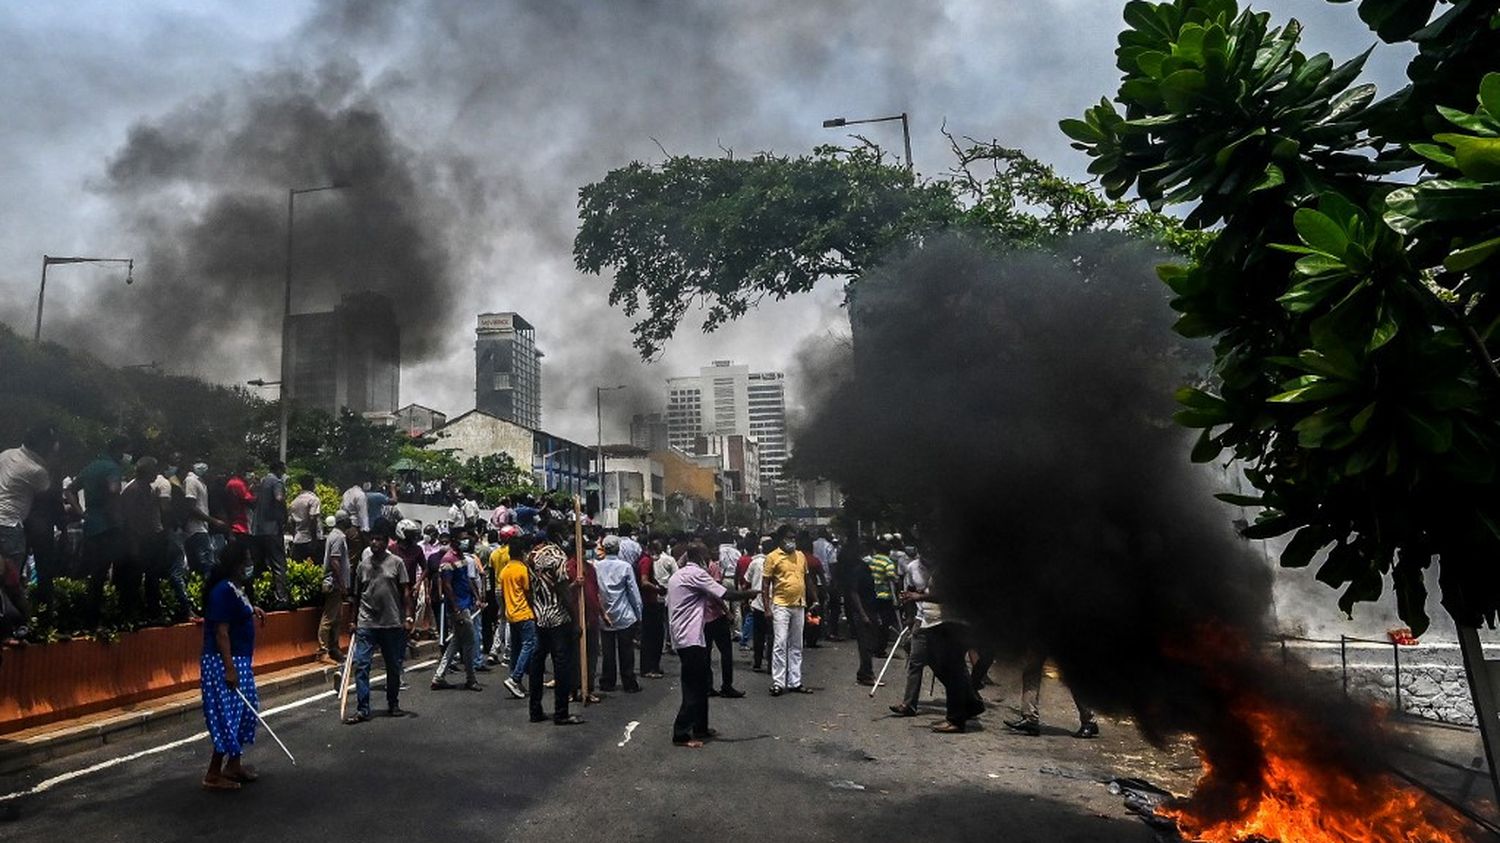 Sri Lanka: at least 78 injured in clashes between supporters and opponents of the government
